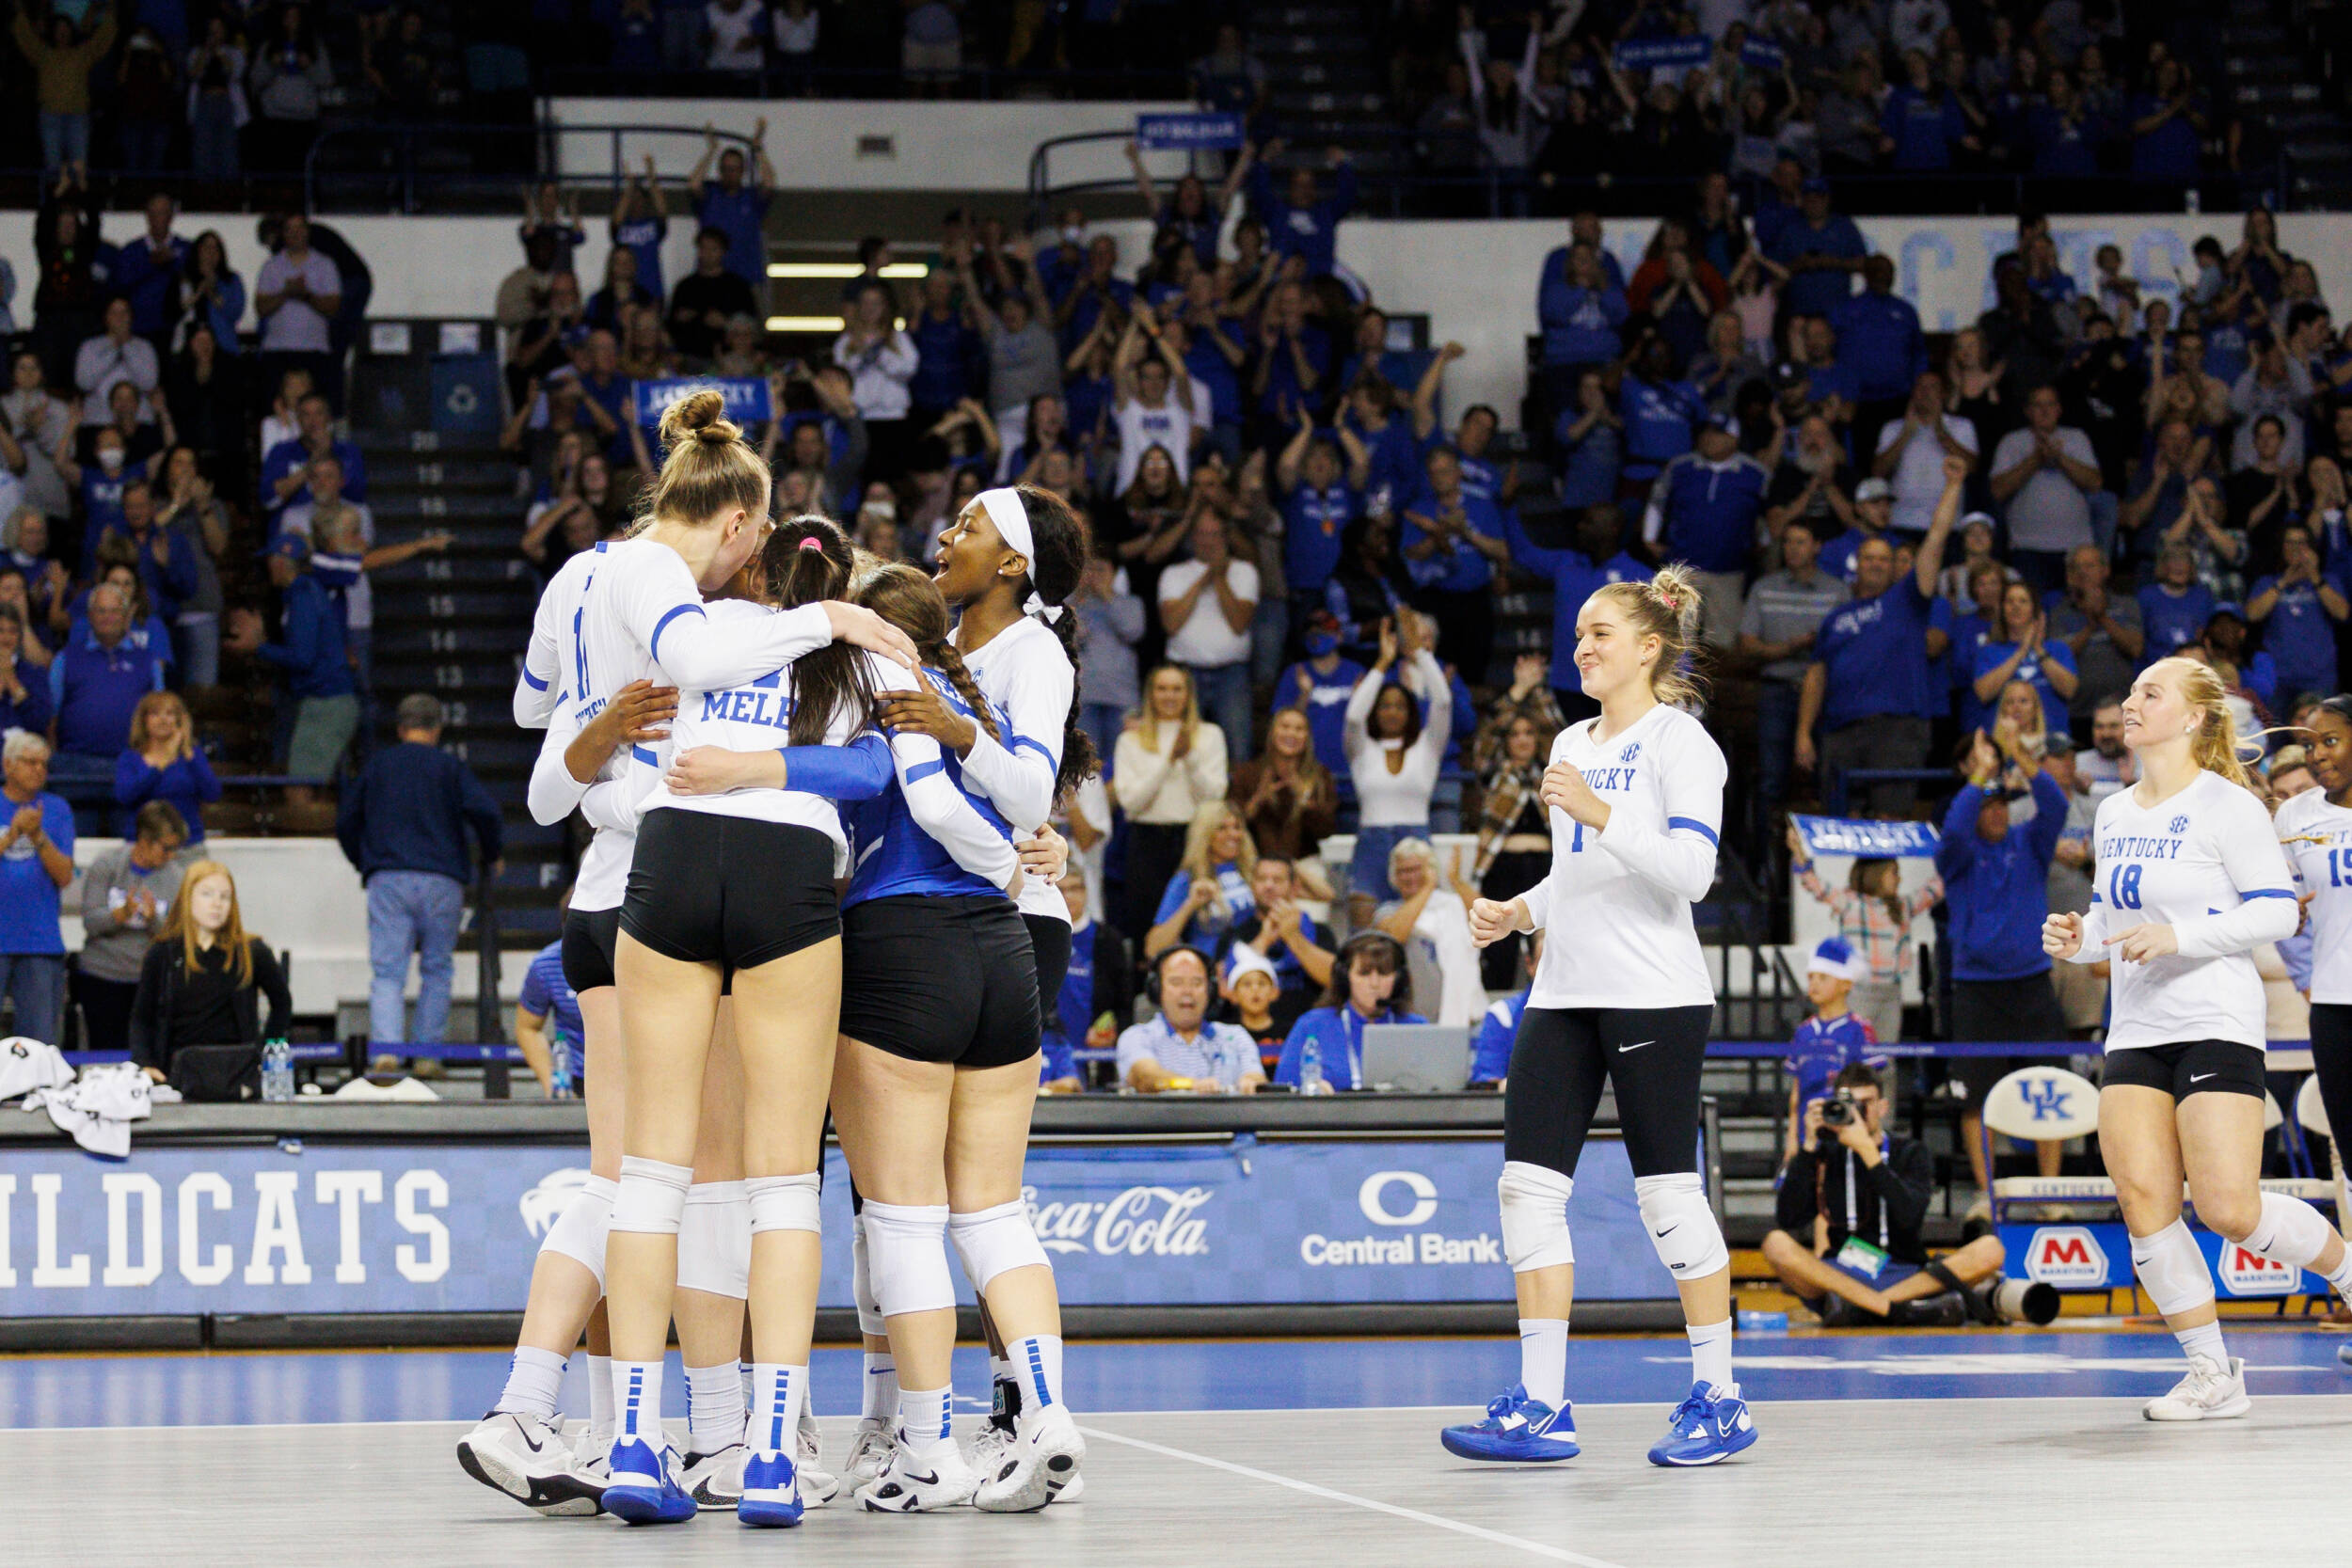 Grome Powers Kentucky to 3-0 Sweep as Wildcats Hit .456